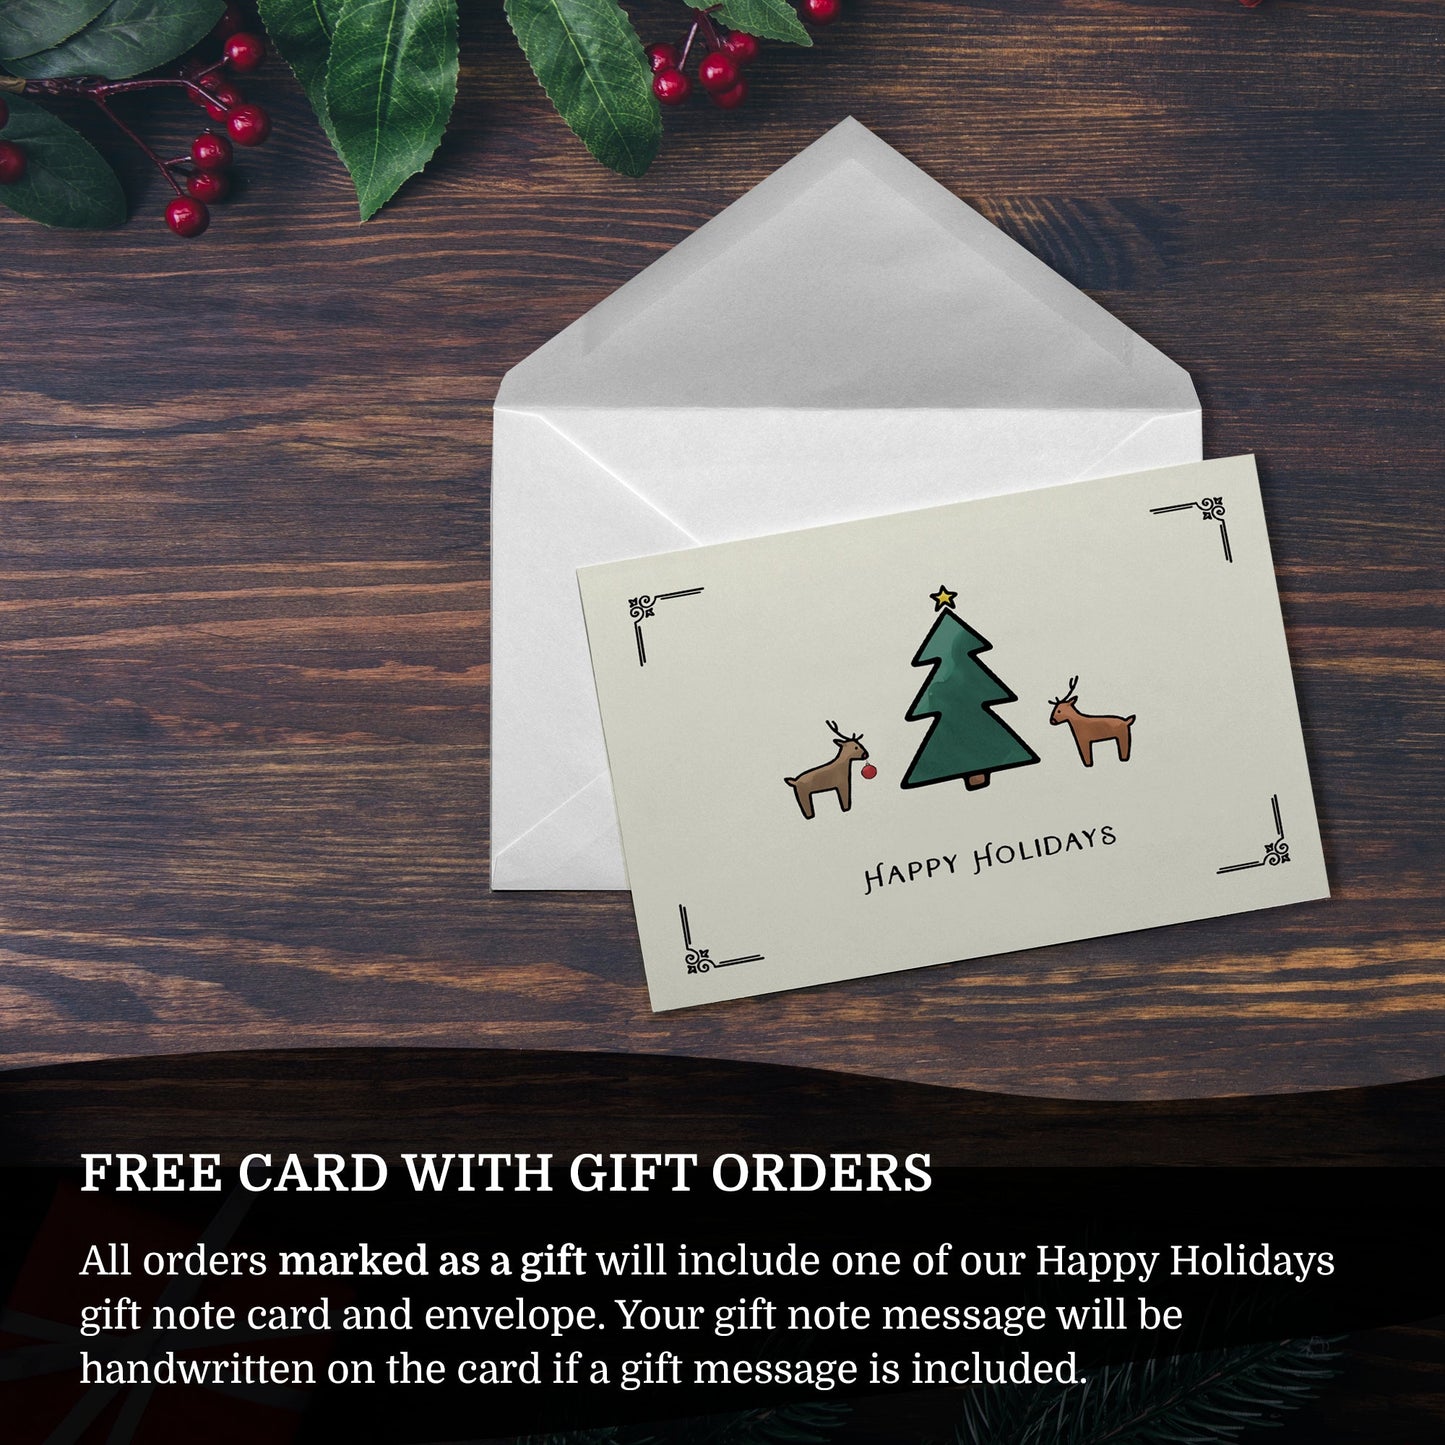 Free Card with Gift Orders